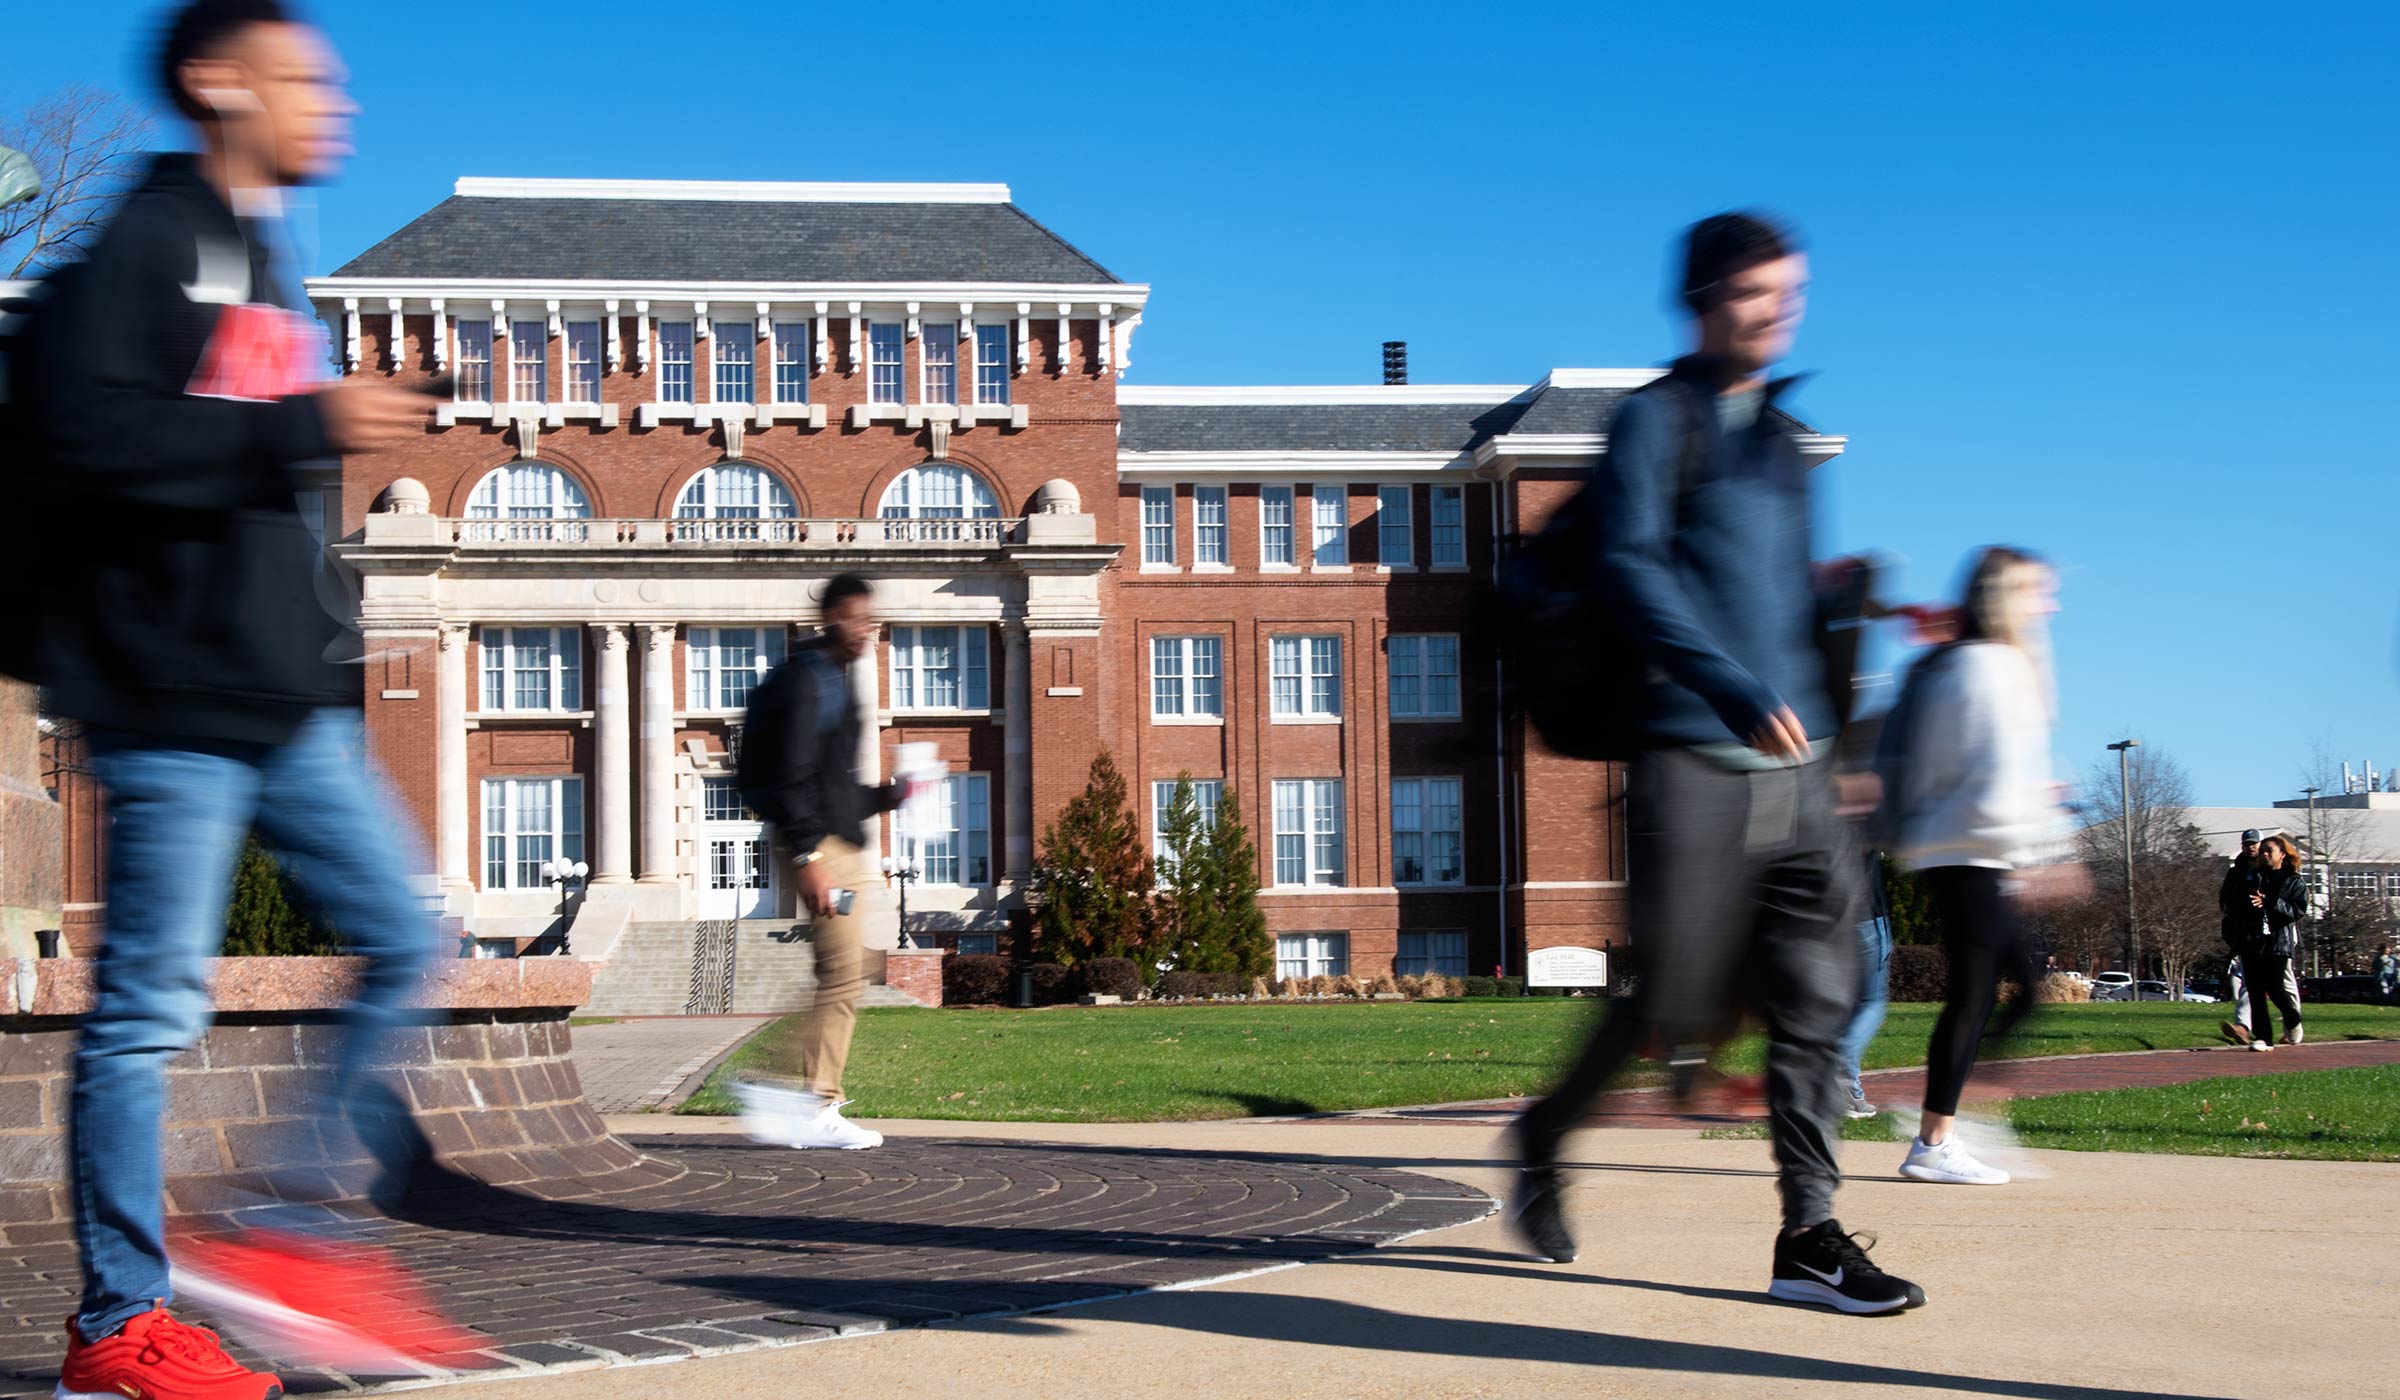 Students blurred in walking motion in front of red brick building